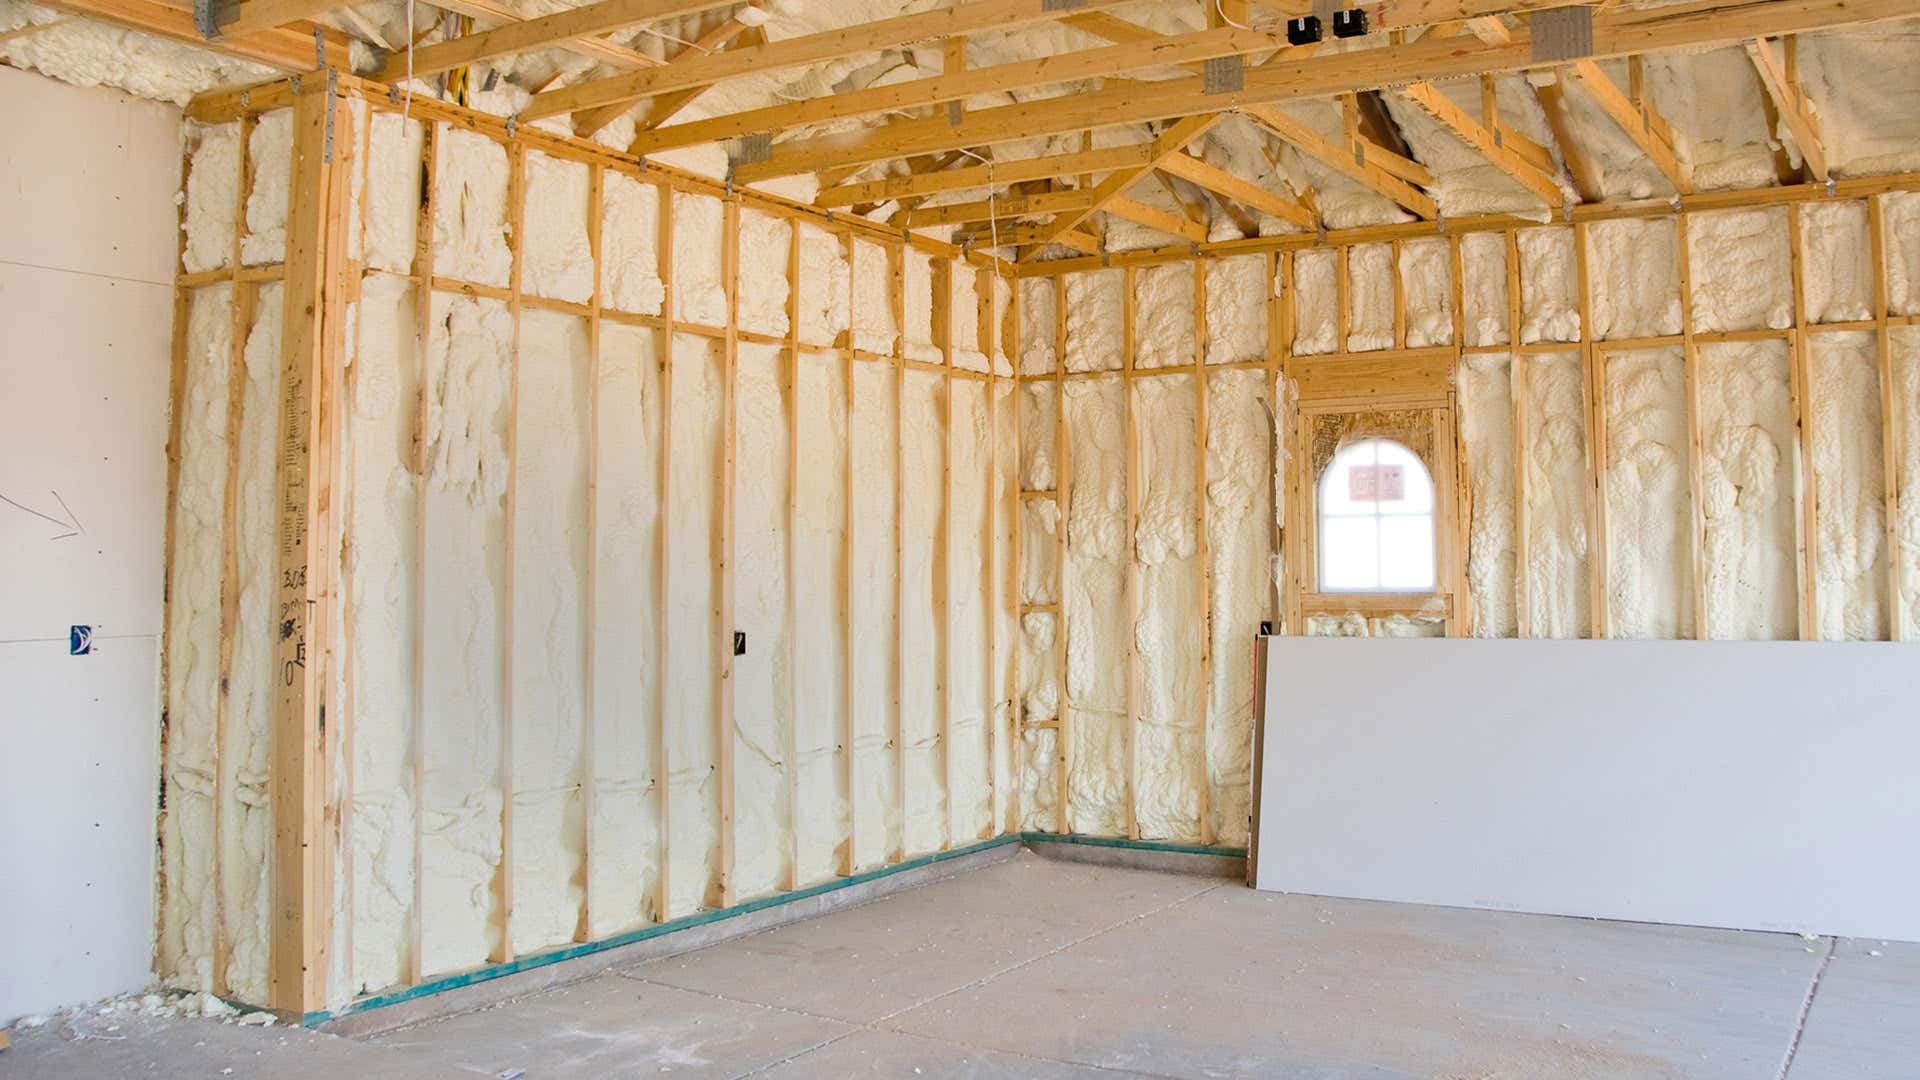 How To Insulate A Garage The Drive, Garage Under House Insulation